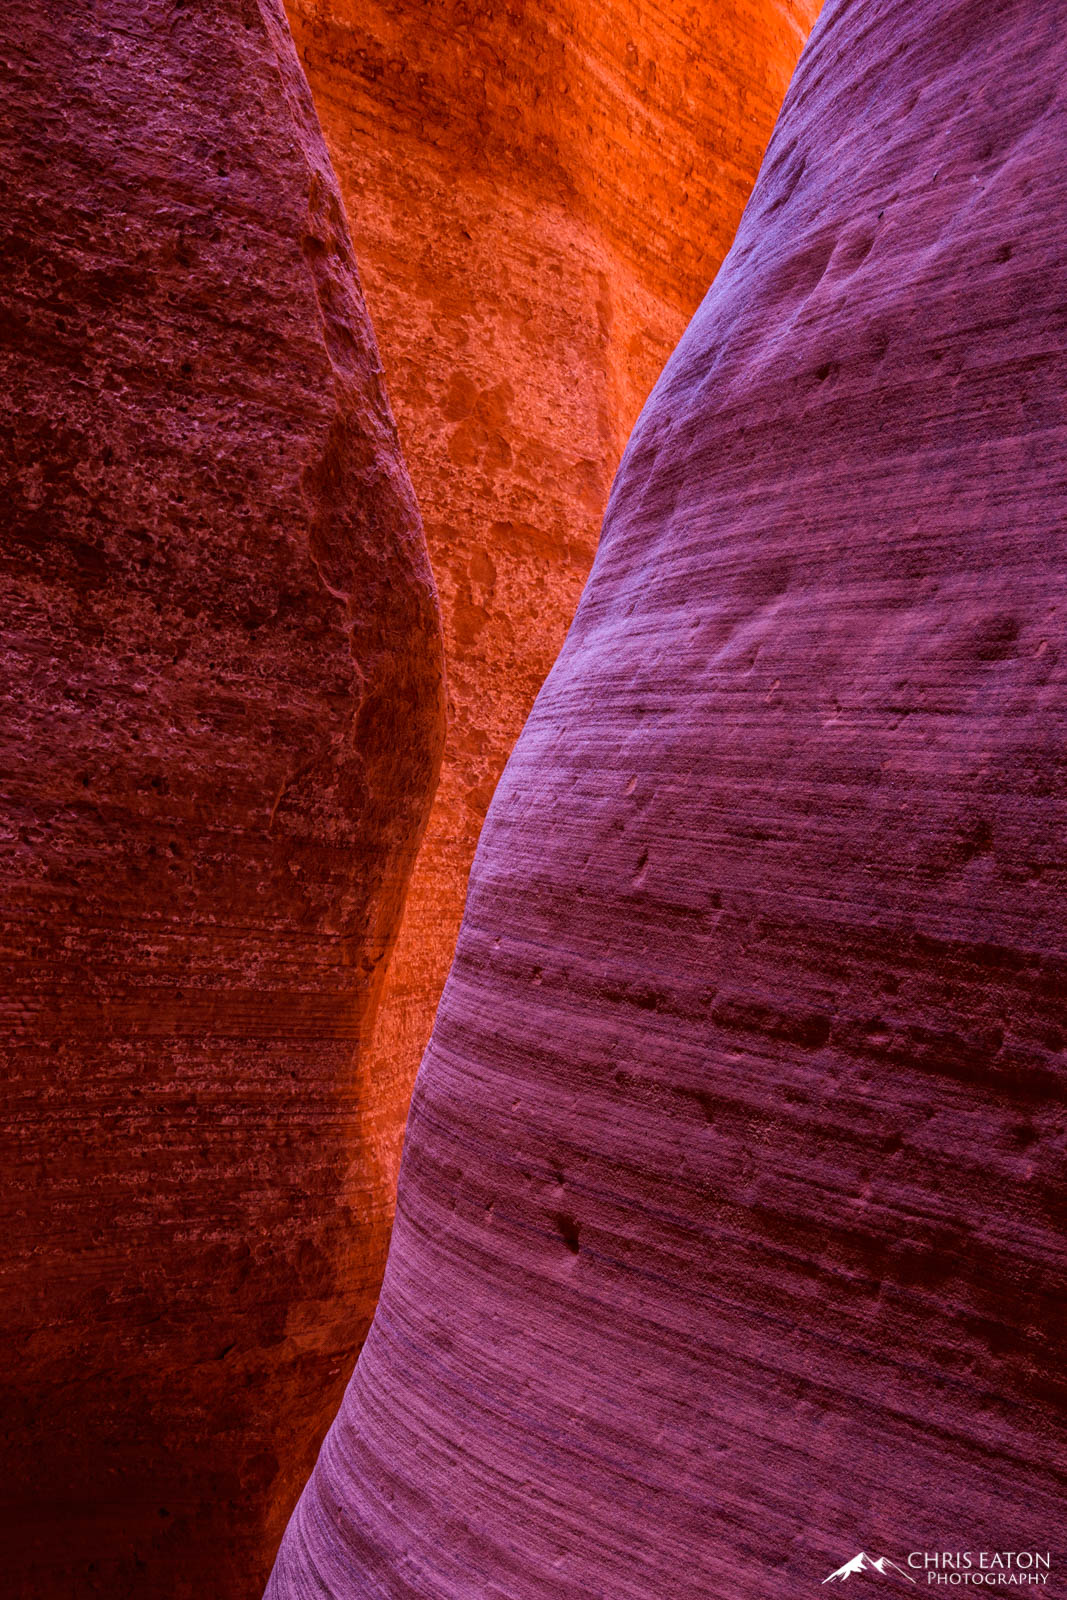 Slot Canyons are full of curves carved by the flowing watrers of flash floods. When you connect the curves and explore that connecdtion...